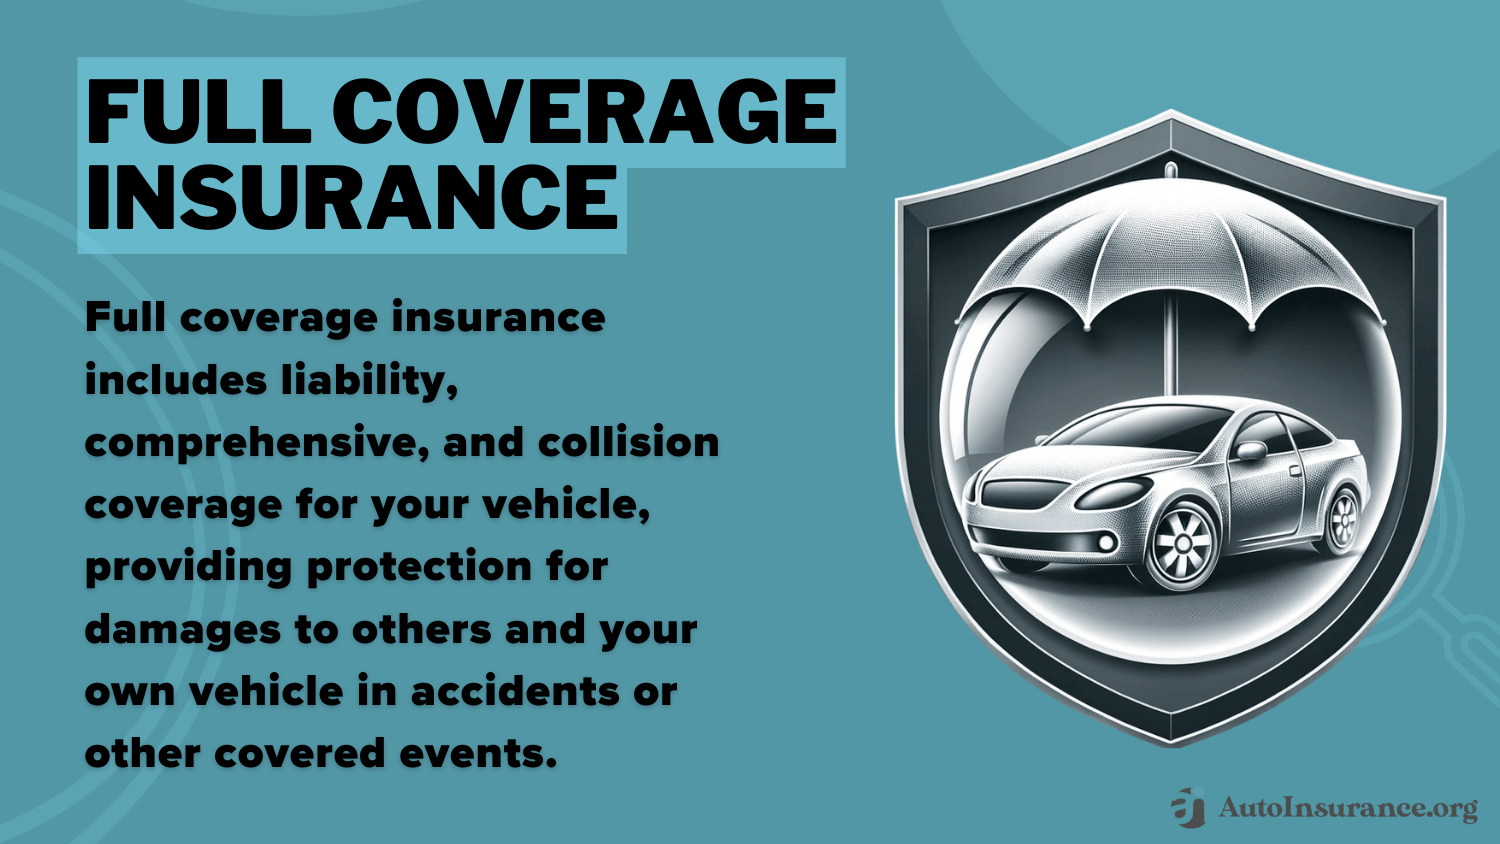 At-Fault Accident: Full Coverage Insurance